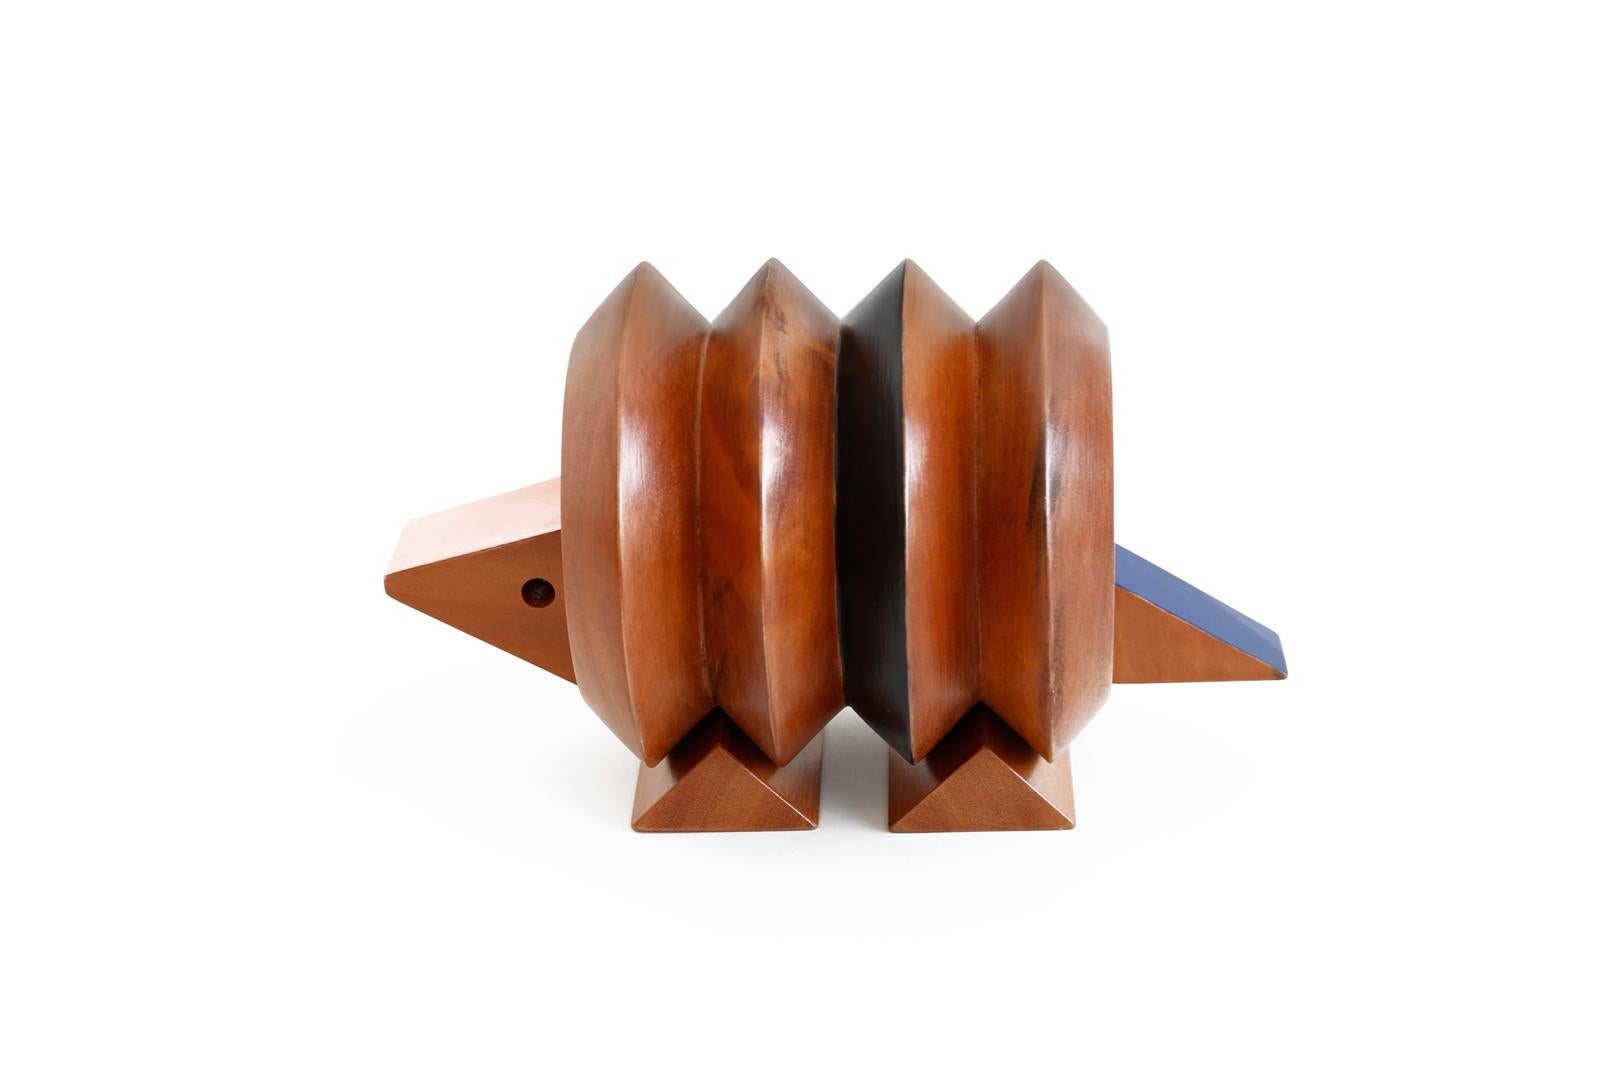 TATU-BOLA (armadillo in Portuguese) is part of Bichos do Brasil collection that is decorative and collectible objects of wooden figures that represent animals of the Brazilian Fauna.
The design of the collection translates into a balance between